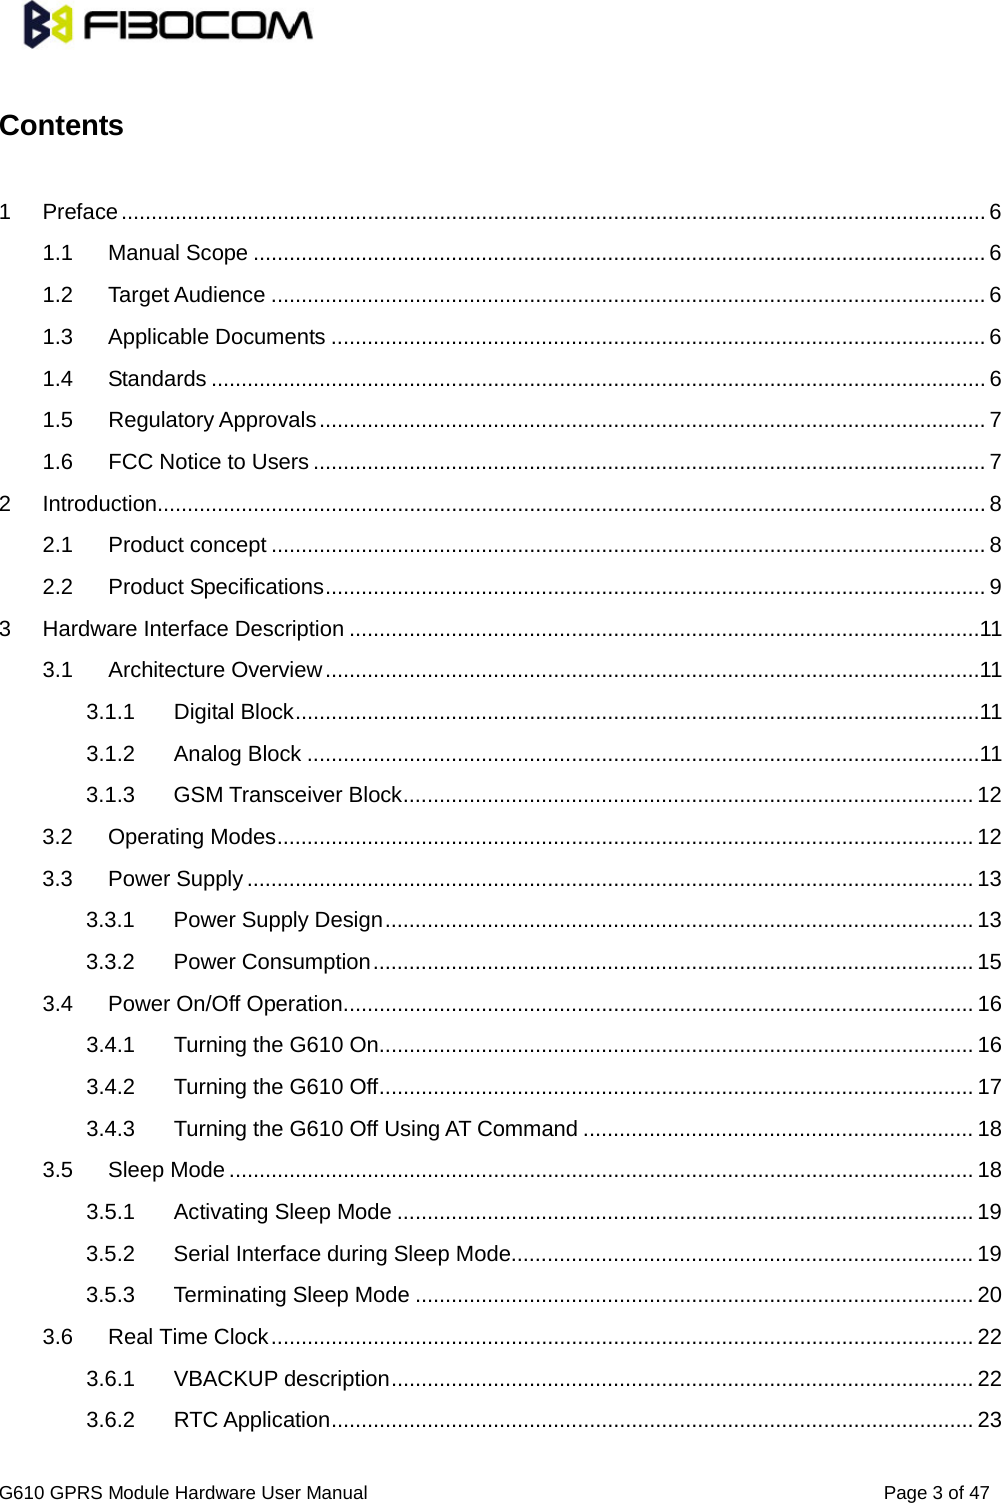                                                                                      G610 GPRS Module Hardware User Manual                                                          Page 3 of 47   Contents    1 Preface   ................................................................................................................................................ 61.1 Manual Scope   .......................................................................................................................... 61.2 Target Audience   ....................................................................................................................... 61.3 Applicable Documents   ............................................................................................................. 61.4 Standards   ................................................................................................................................. 61.5 Regulatory Approvals   ............................................................................................................... 71.6 FCC Notice to Users   ................................................................................................................ 72 Introduction   .......................................................................................................................................... 82.1 Product concept   ....................................................................................................................... 82.2 Product Specifications   .............................................................................................................. 93 Hardware Interface Description   .........................................................................................................113.1 Architecture Overview   .............................................................................................................113.1.1 Digital Block   ..................................................................................................................113.1.2 Analog Block   ................................................................................................................113.1.3 GSM Transceiver Block   ............................................................................................... 123.2 Operating Modes   .................................................................................................................... 123.3 Power Supply   ......................................................................................................................... 133.3.1 Power Supply Design   .................................................................................................. 133.3.2 Power Consumption   .................................................................................................... 153.4 Power On/Off Operation   ......................................................................................................... 163.4.1 Turning the G610 On   ................................................................................................... 163.4.2 Turning the G610 Off   ................................................................................................... 173.4.3 Turning the G610 Off Using AT Command   ................................................................. 183.5 Sleep Mode   ............................................................................................................................ 183.5.1 Activating Sleep Mode   ................................................................................................ 193.5.2 Serial Interface during Sleep Mode   ............................................................................. 193.5.3 Terminating Sleep Mode   ............................................................................................. 203.6 Real Time Clock   ..................................................................................................................... 223.6.1 VBACKUP description   ................................................................................................. 223.6.2 RTC Application   ........................................................................................................... 23